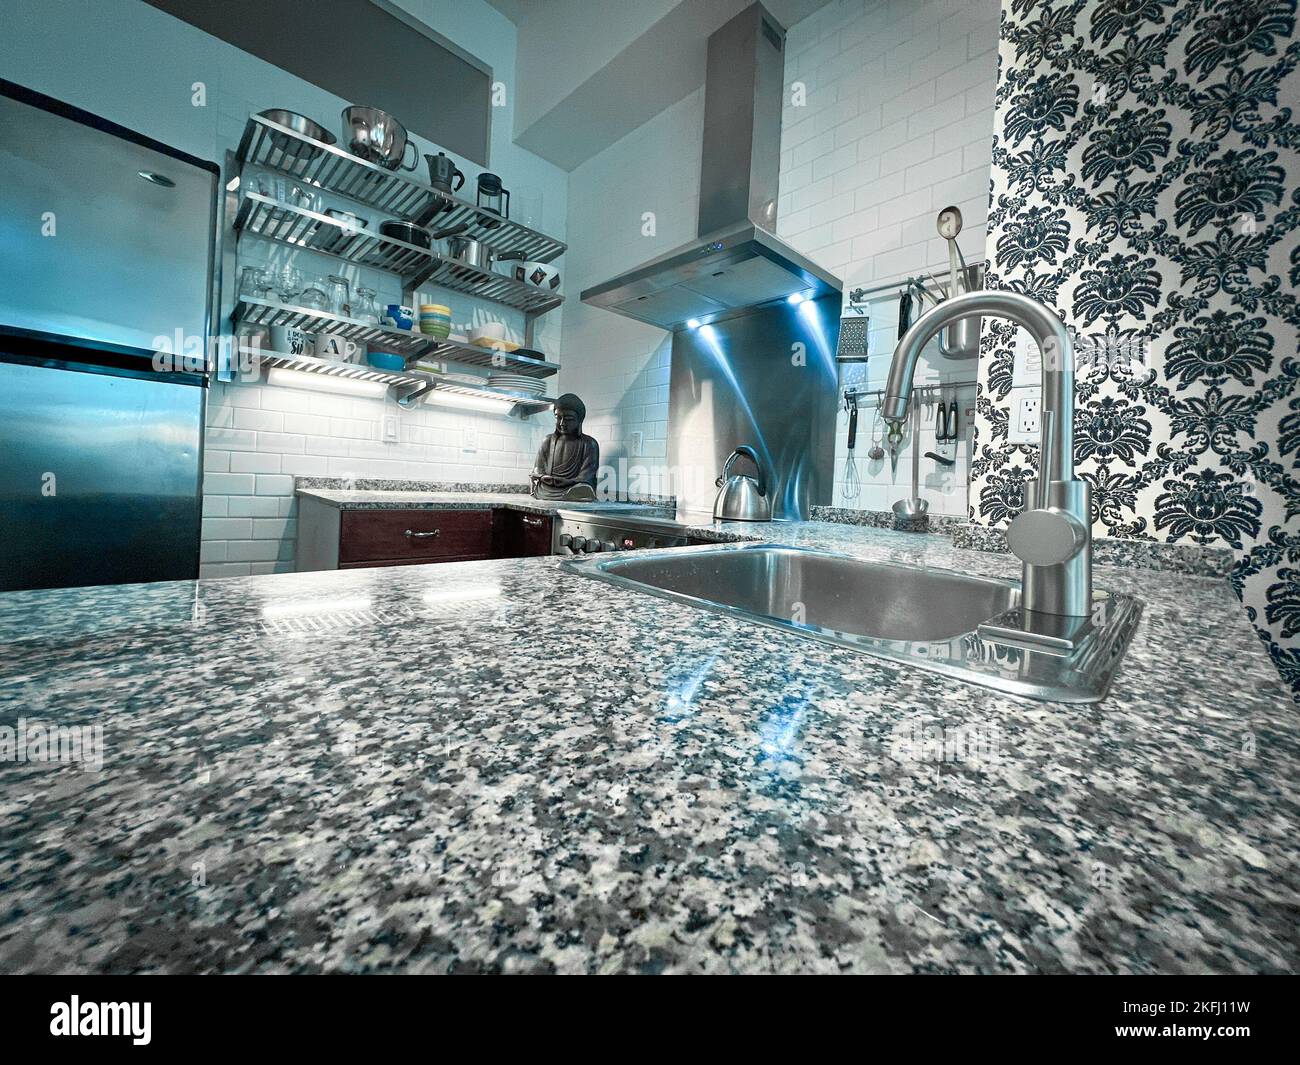 Steel faucet with sink on kitchen island and buddha figurine with illuminated range hood in modern kitchen at home Stock Photo